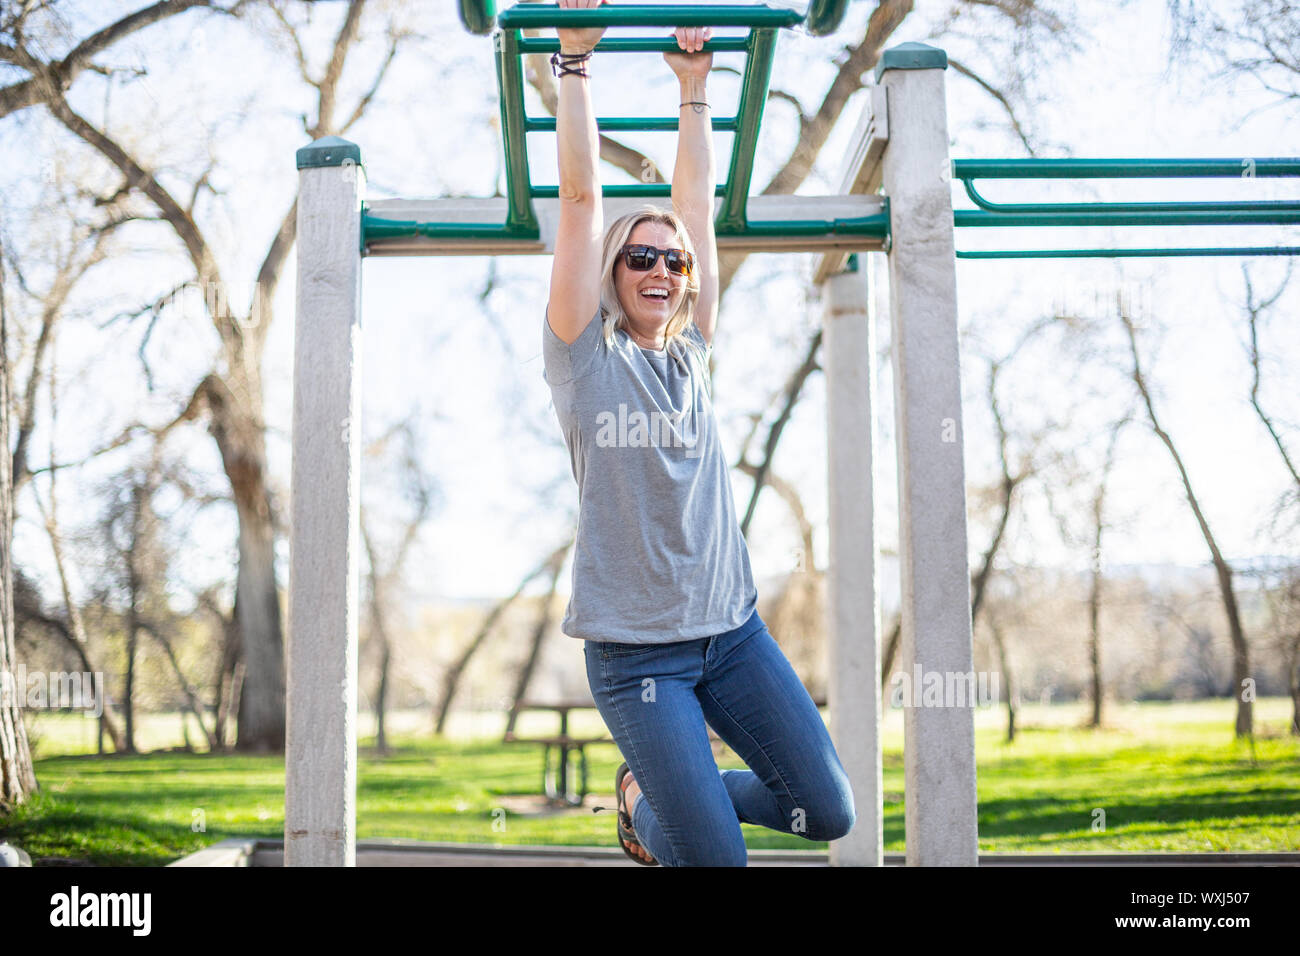 Woman hanging from monkey bars in a playground, United States Stock Photo